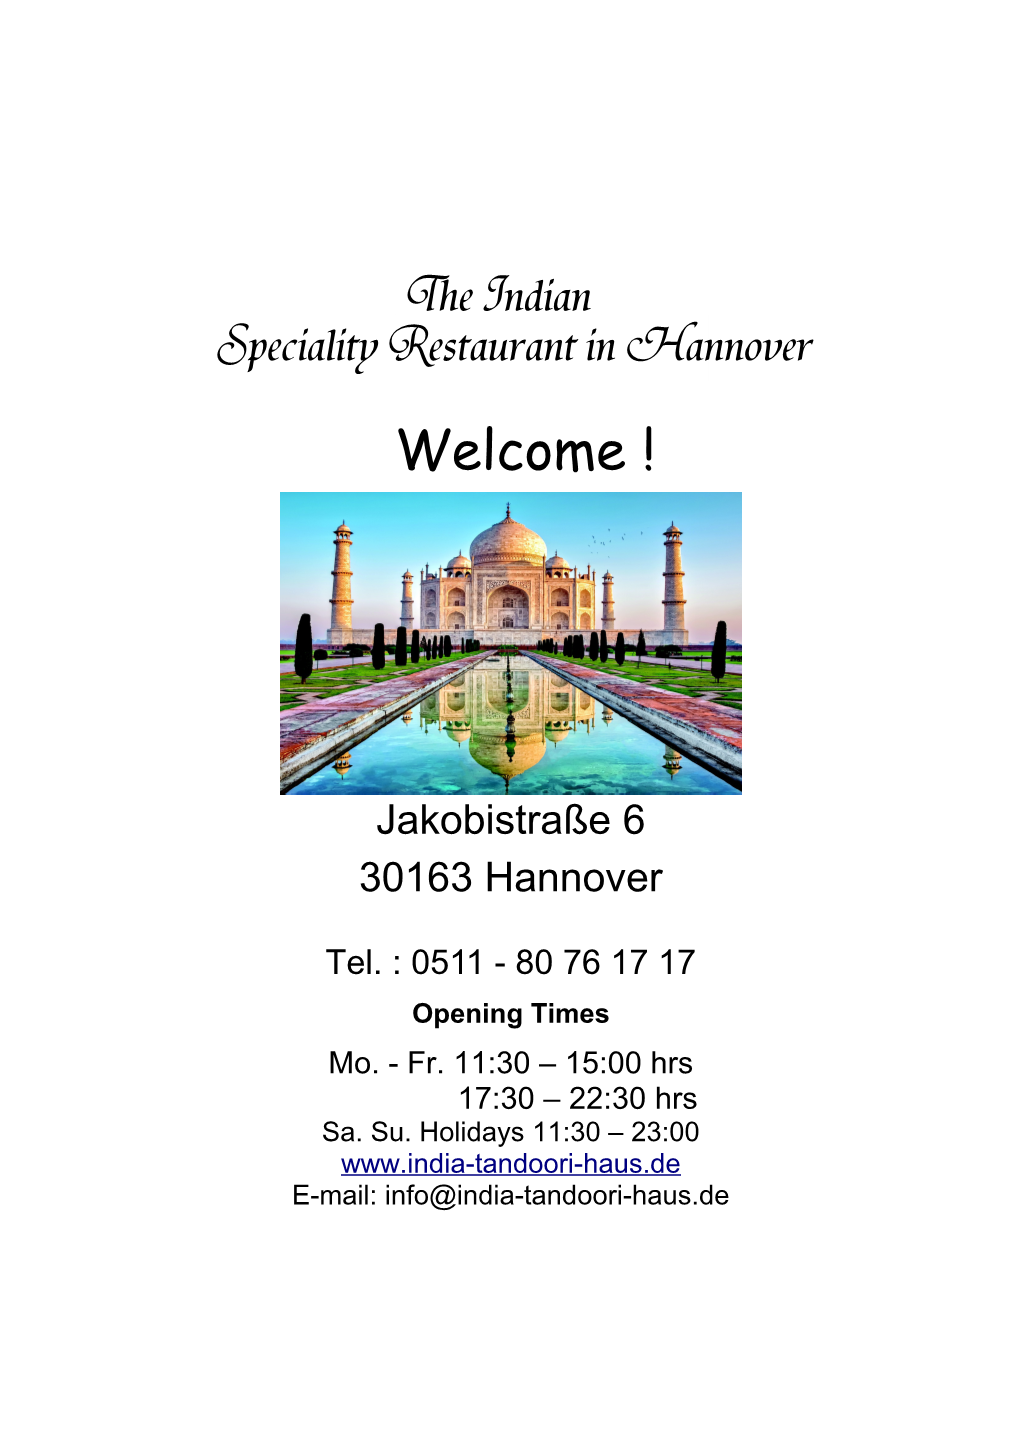 The Indian Speciality Restaurant in Hannover Welcome !